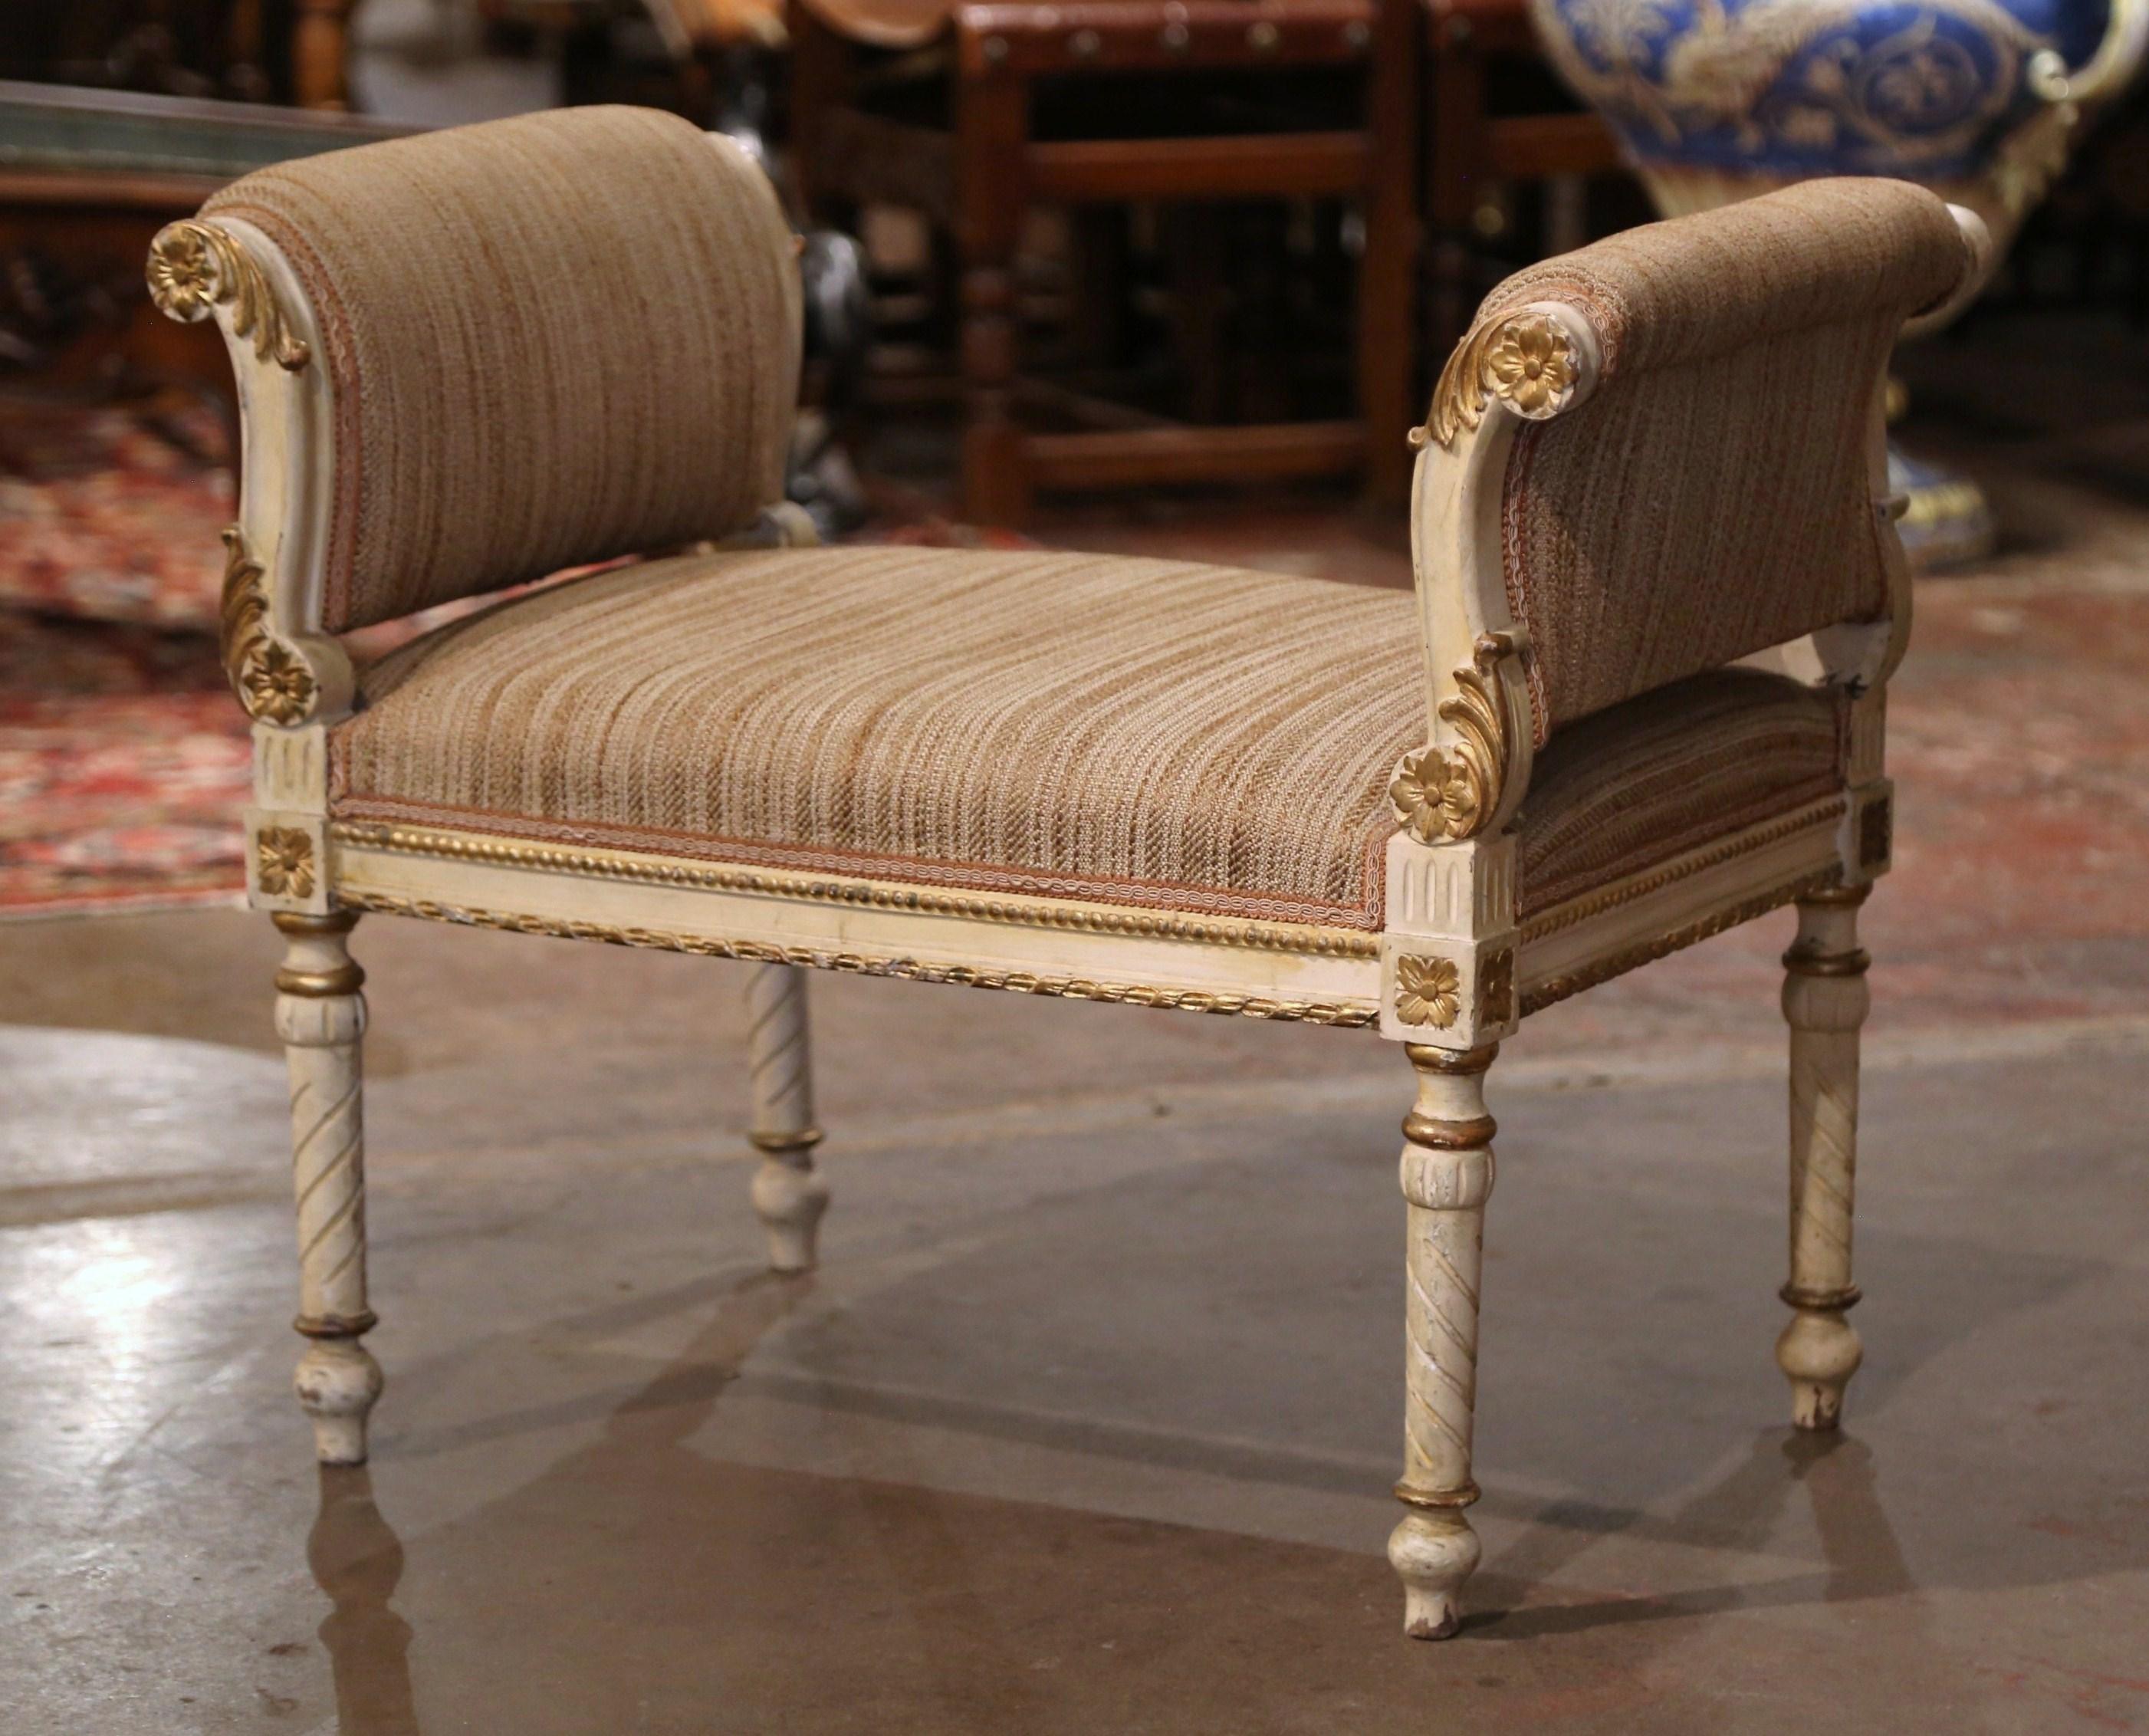 Walnut 19th Century French Empire Upholstered and Gilt Painted Stool Bench For Sale